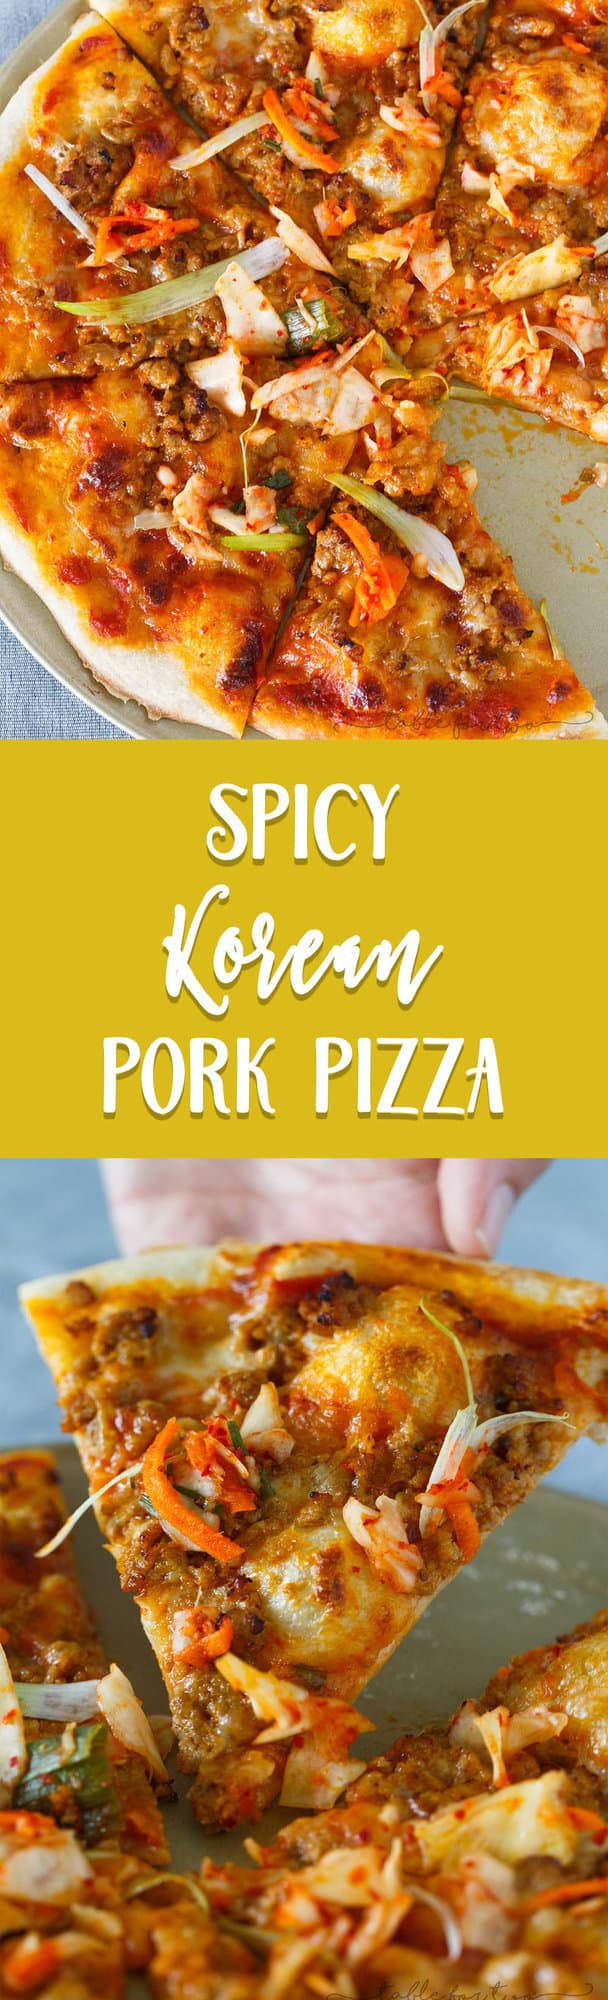 Italy meets Korea in this unique spicy Korean pork pizza recipe! This is a completely fun new way to make and eat pizza if you are a fan of Korean and Asian flavors! The flavors are so bold and perfectly balanced!